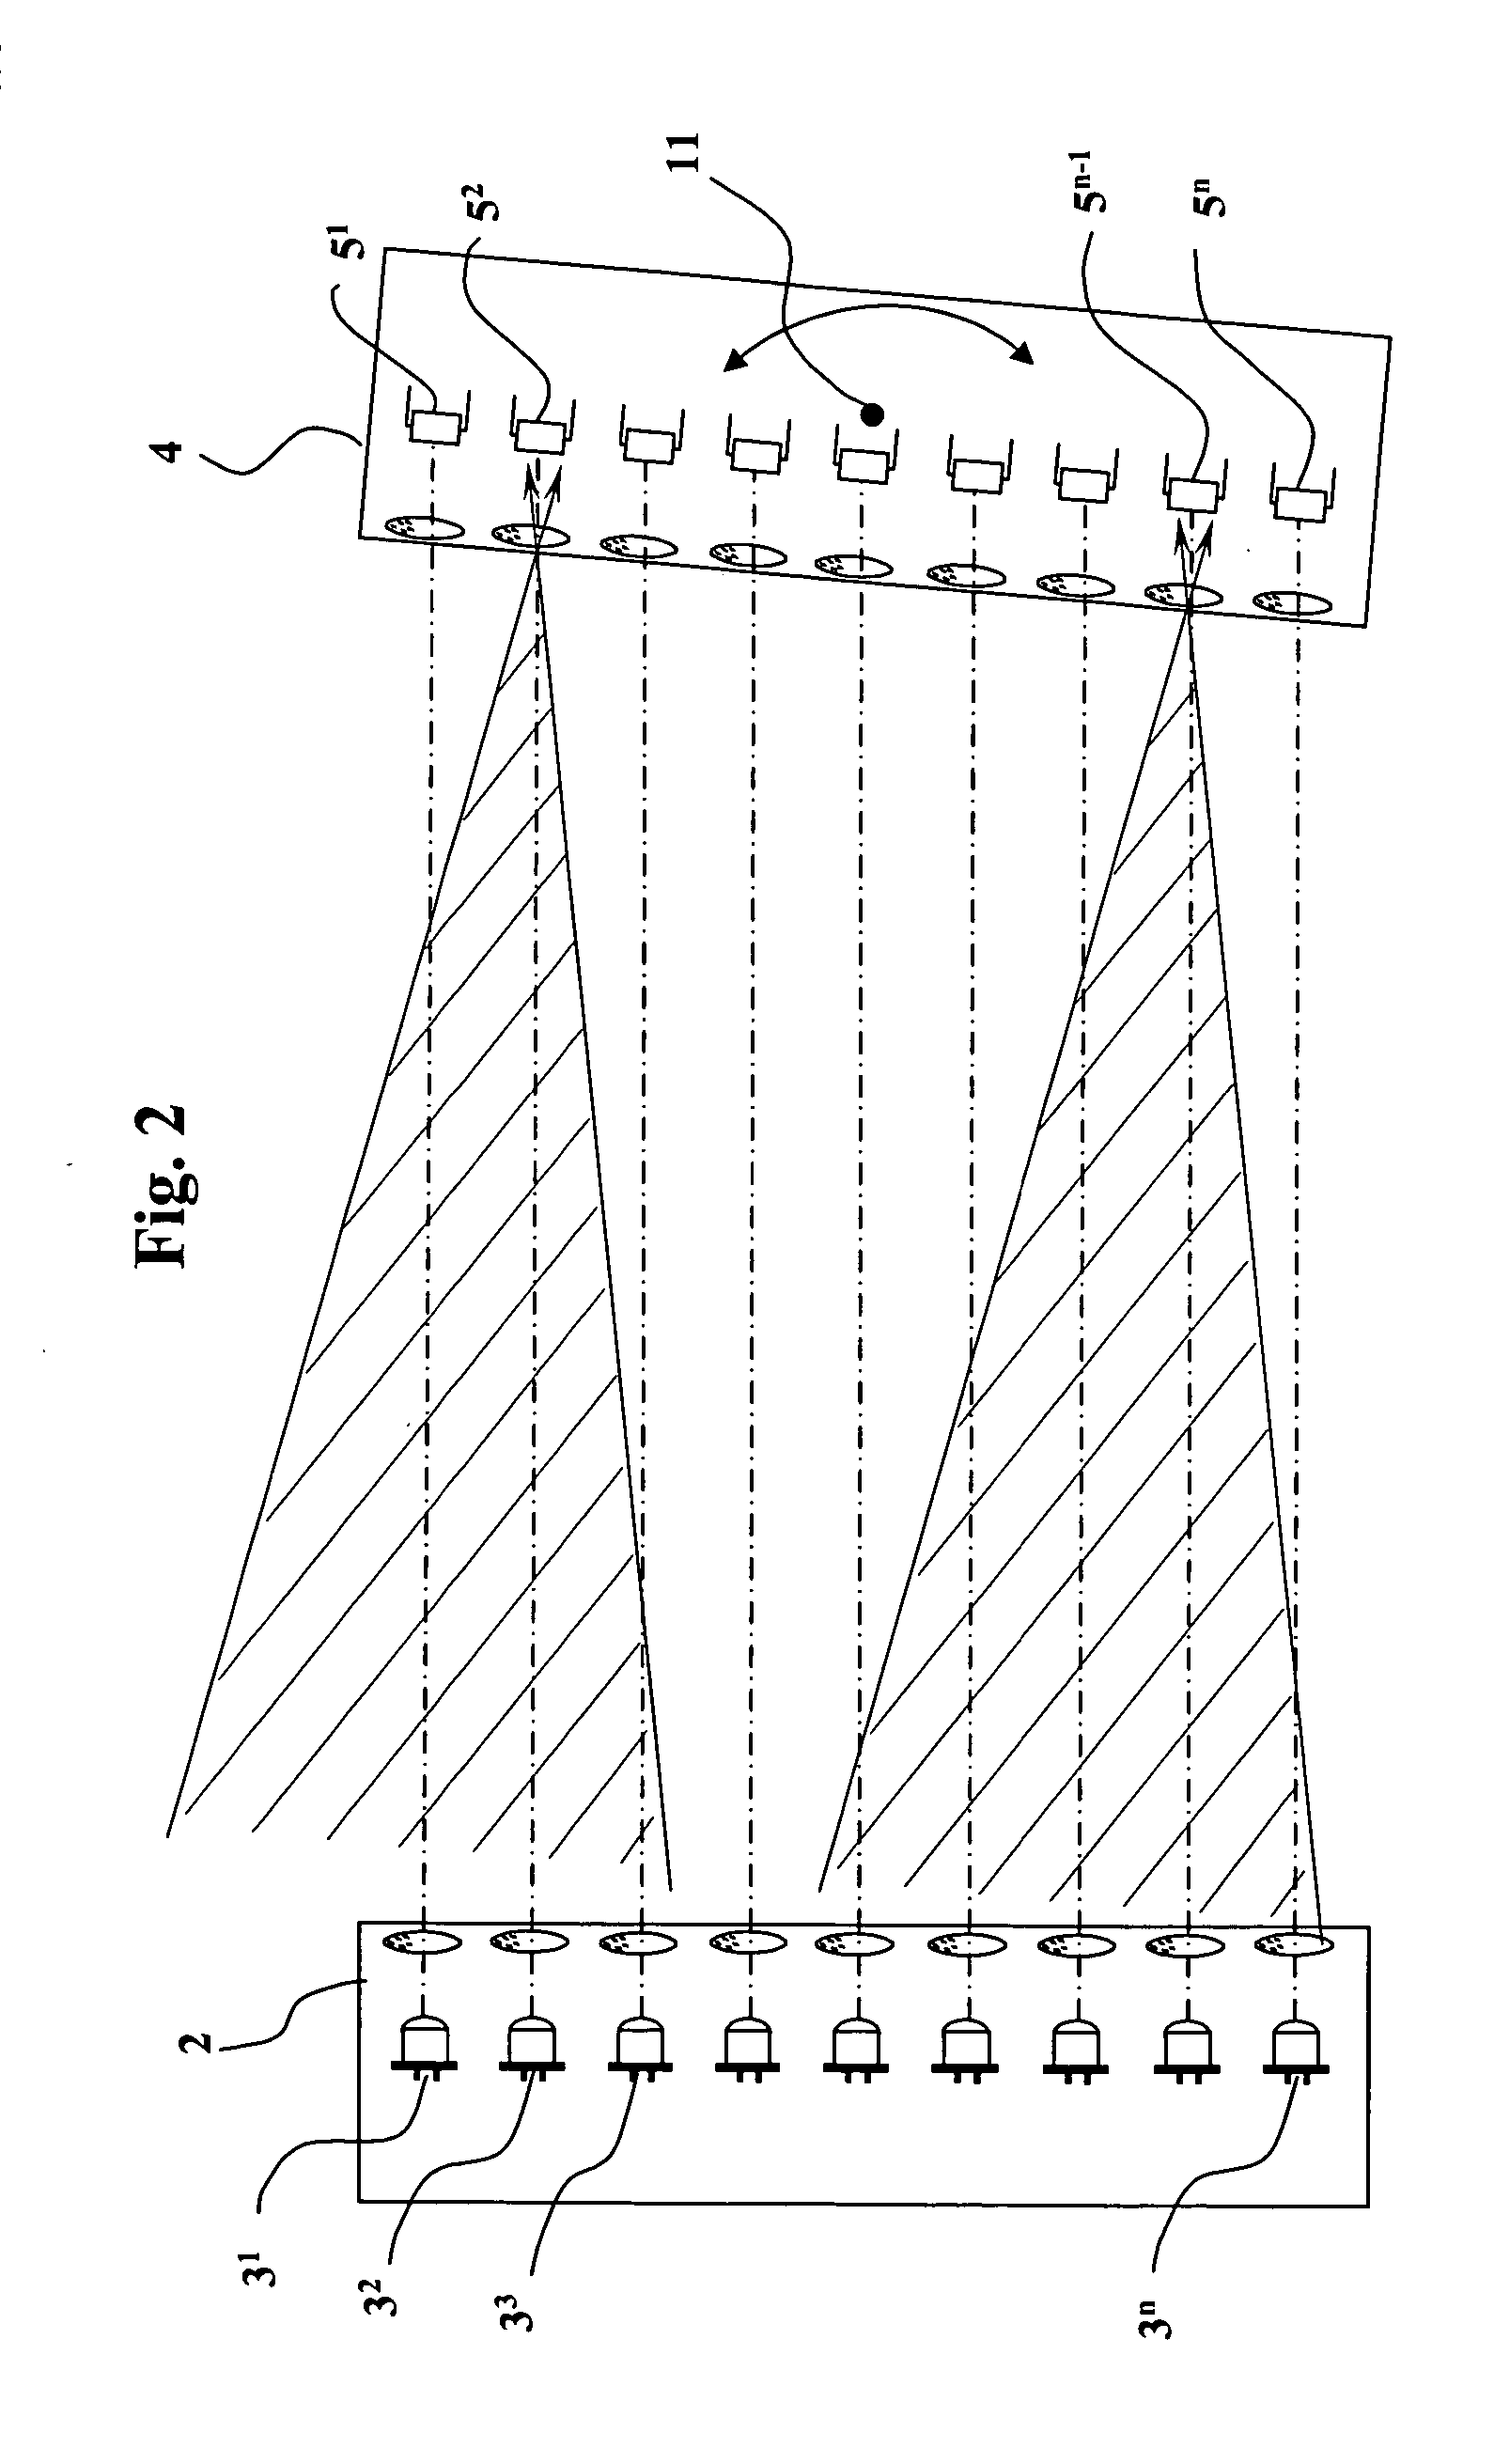 Method and apparatus for monitoring surfaces